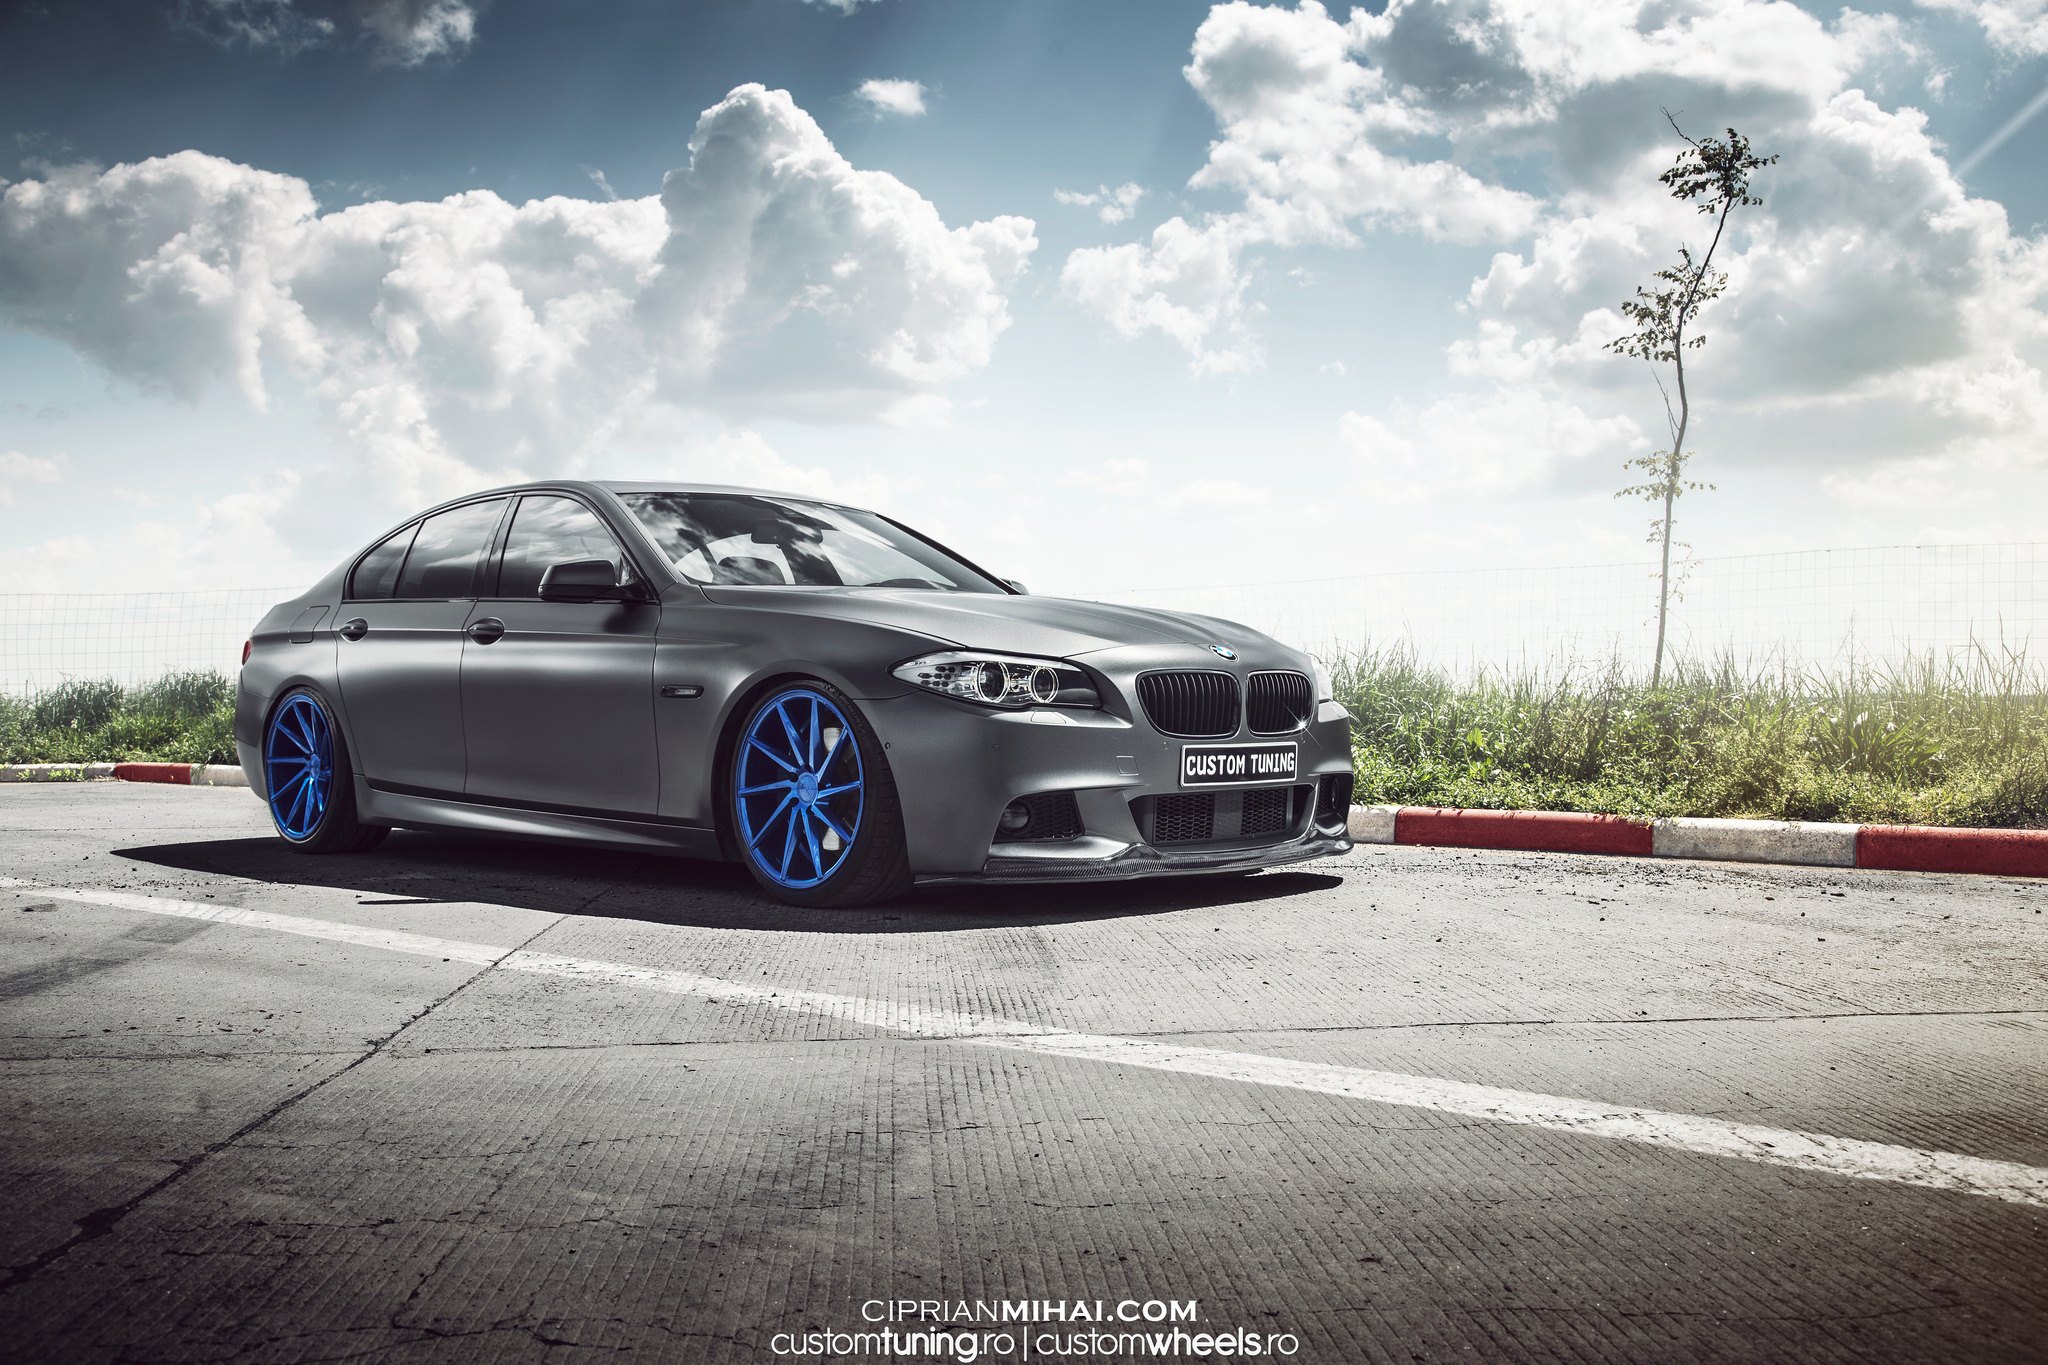 Carbon Fiber Front Lip on Gray BMW 5-Series - Photo by Ciprian Mihai